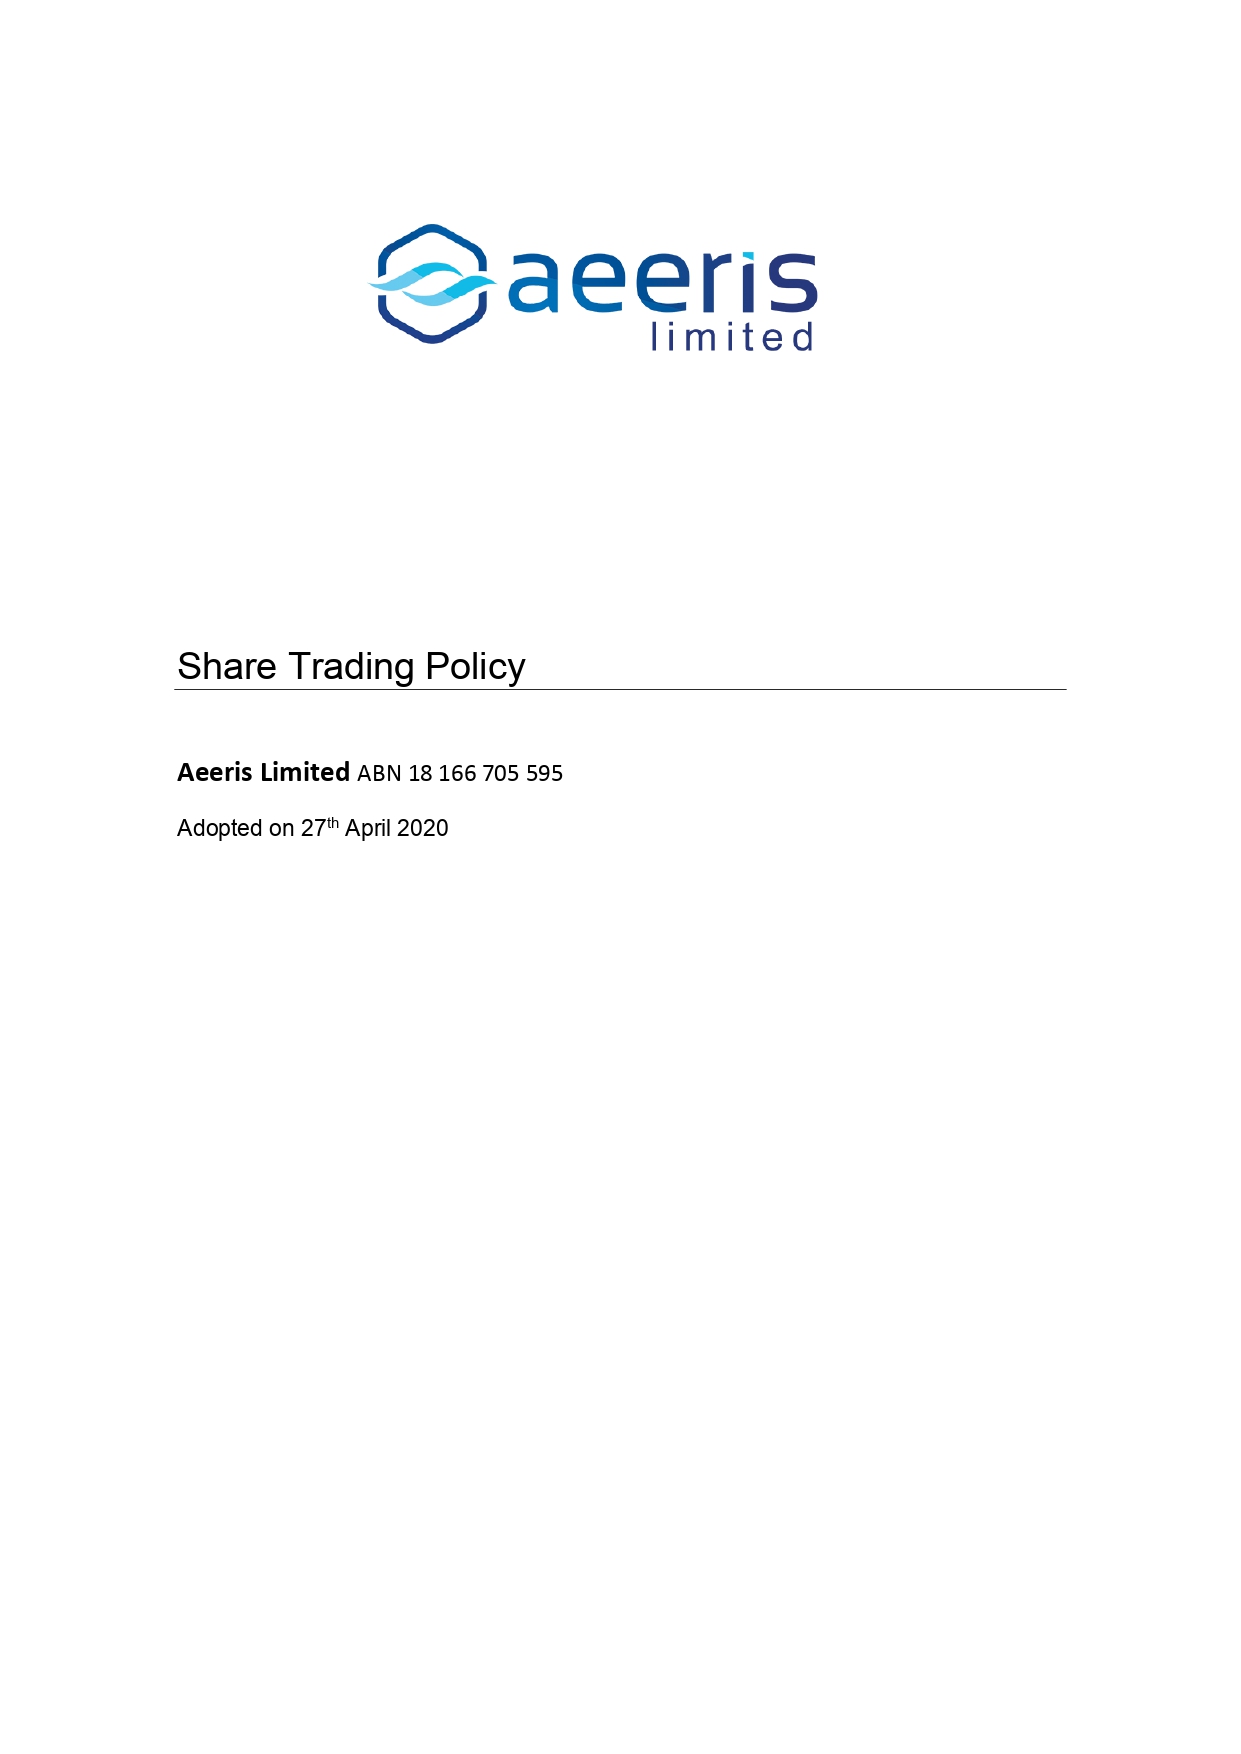 AER Share Trading Policy